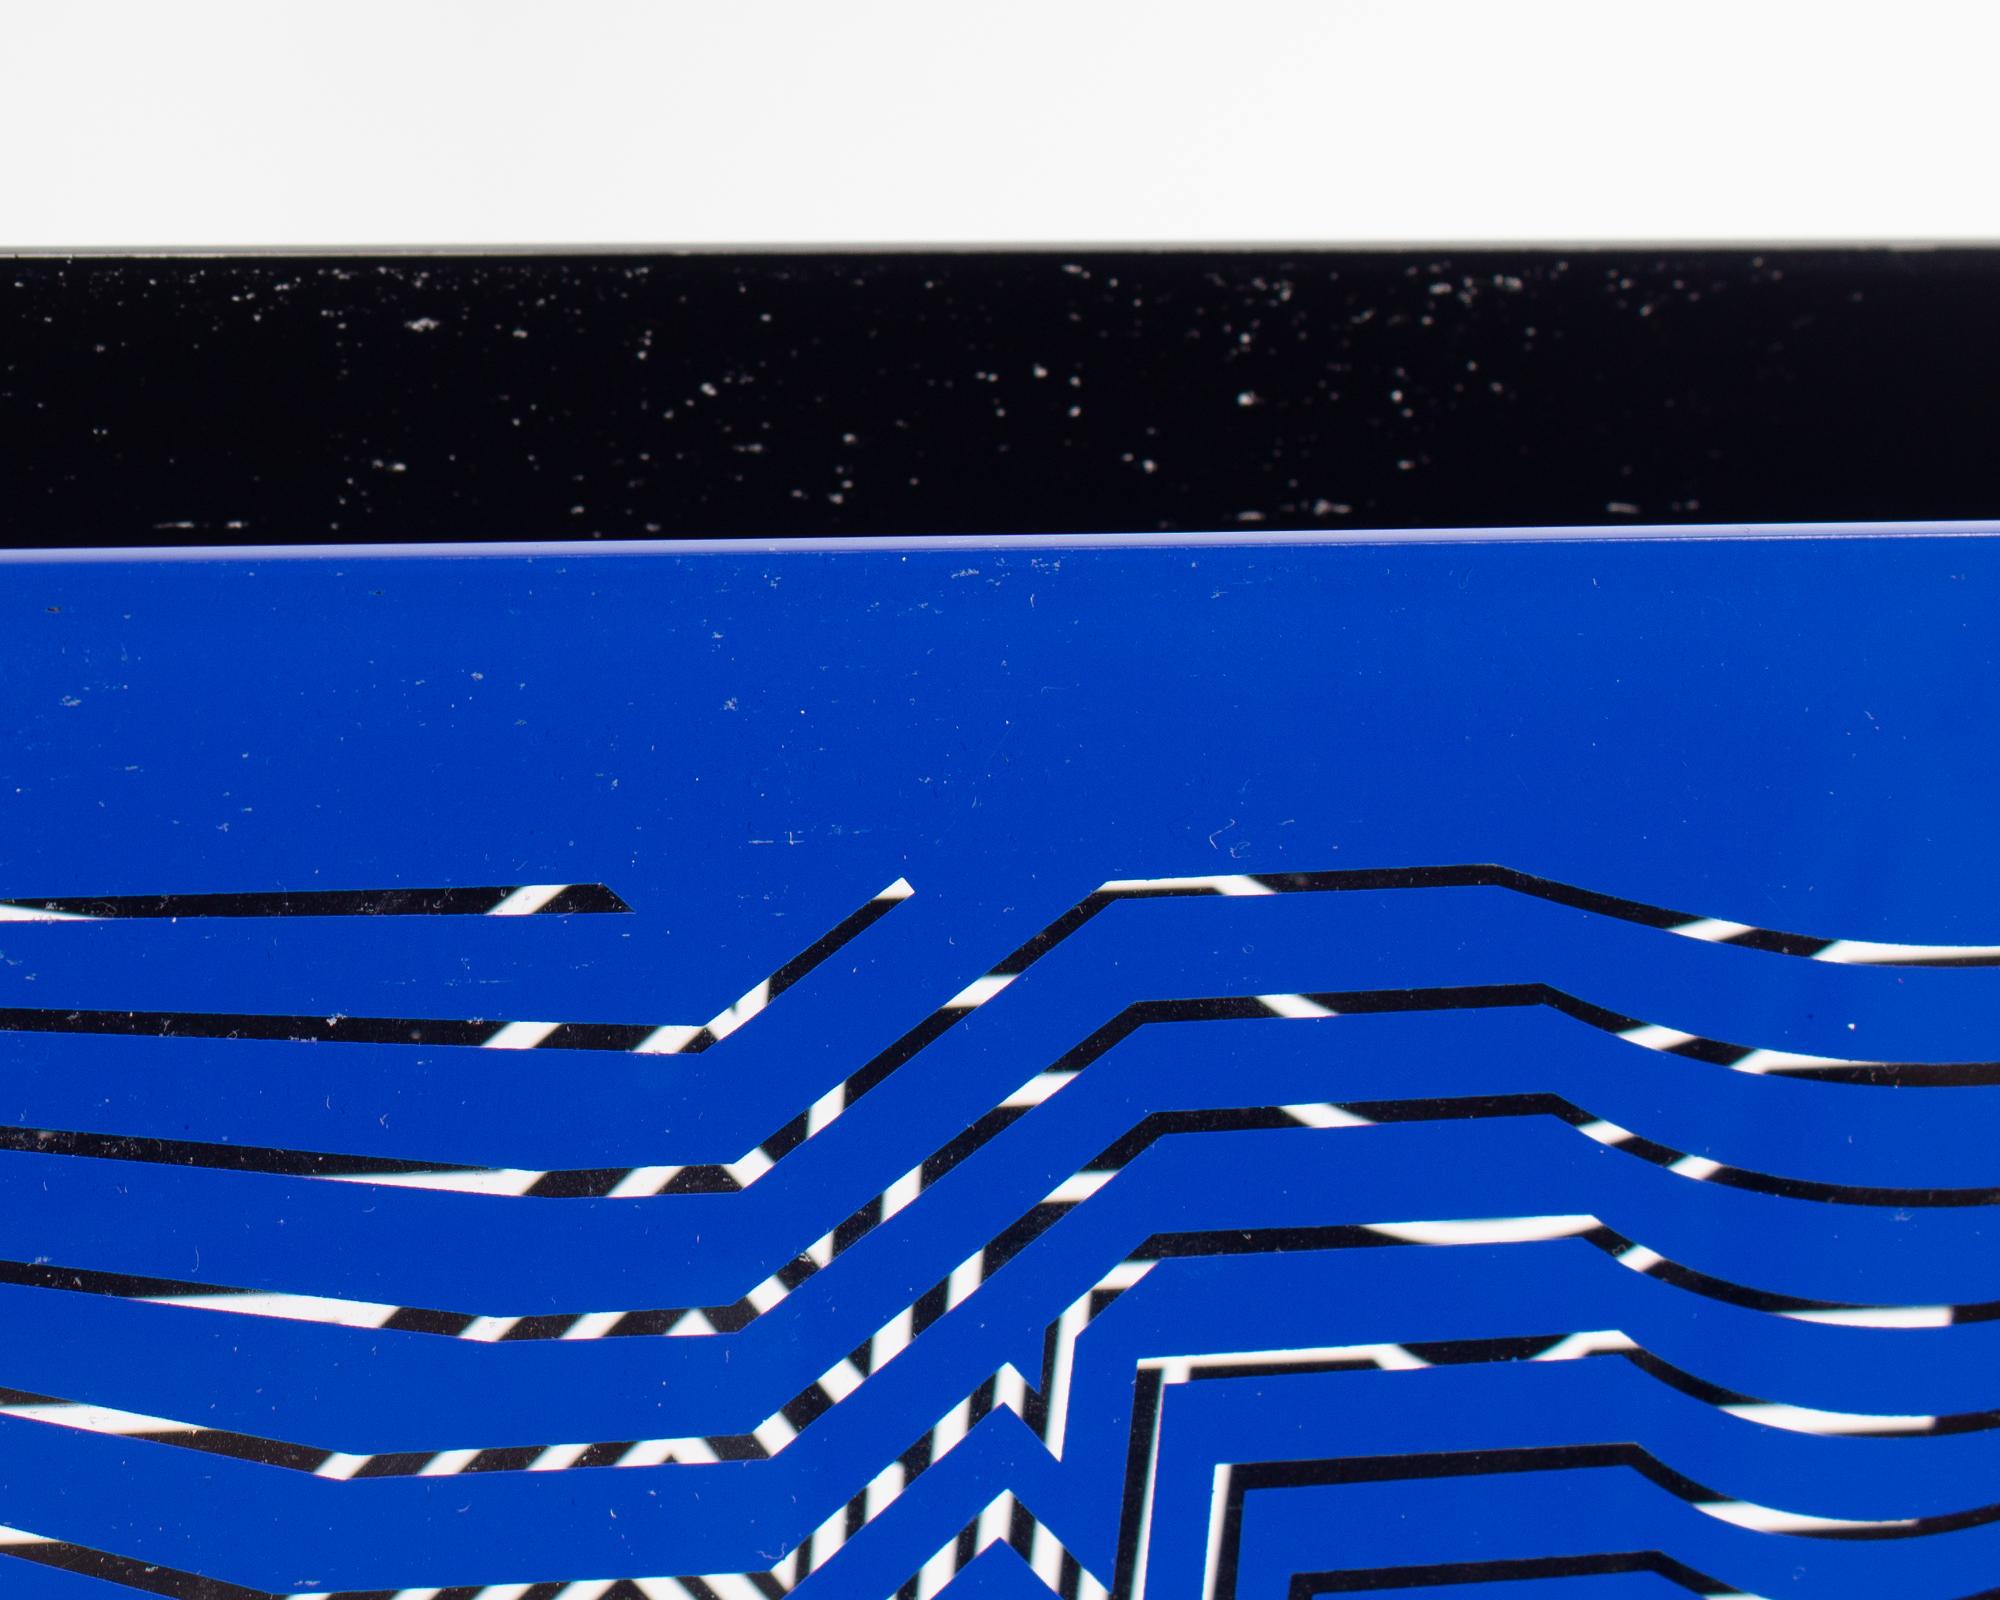 A 1981 limited edition acrylic sculpture by the Hungarian-French Op Art artist Victor Vasarely (1906-1997). This sculpture consists of two acrylic panels with geometric designs on each, one in blue and one in black, attached together by a fabric